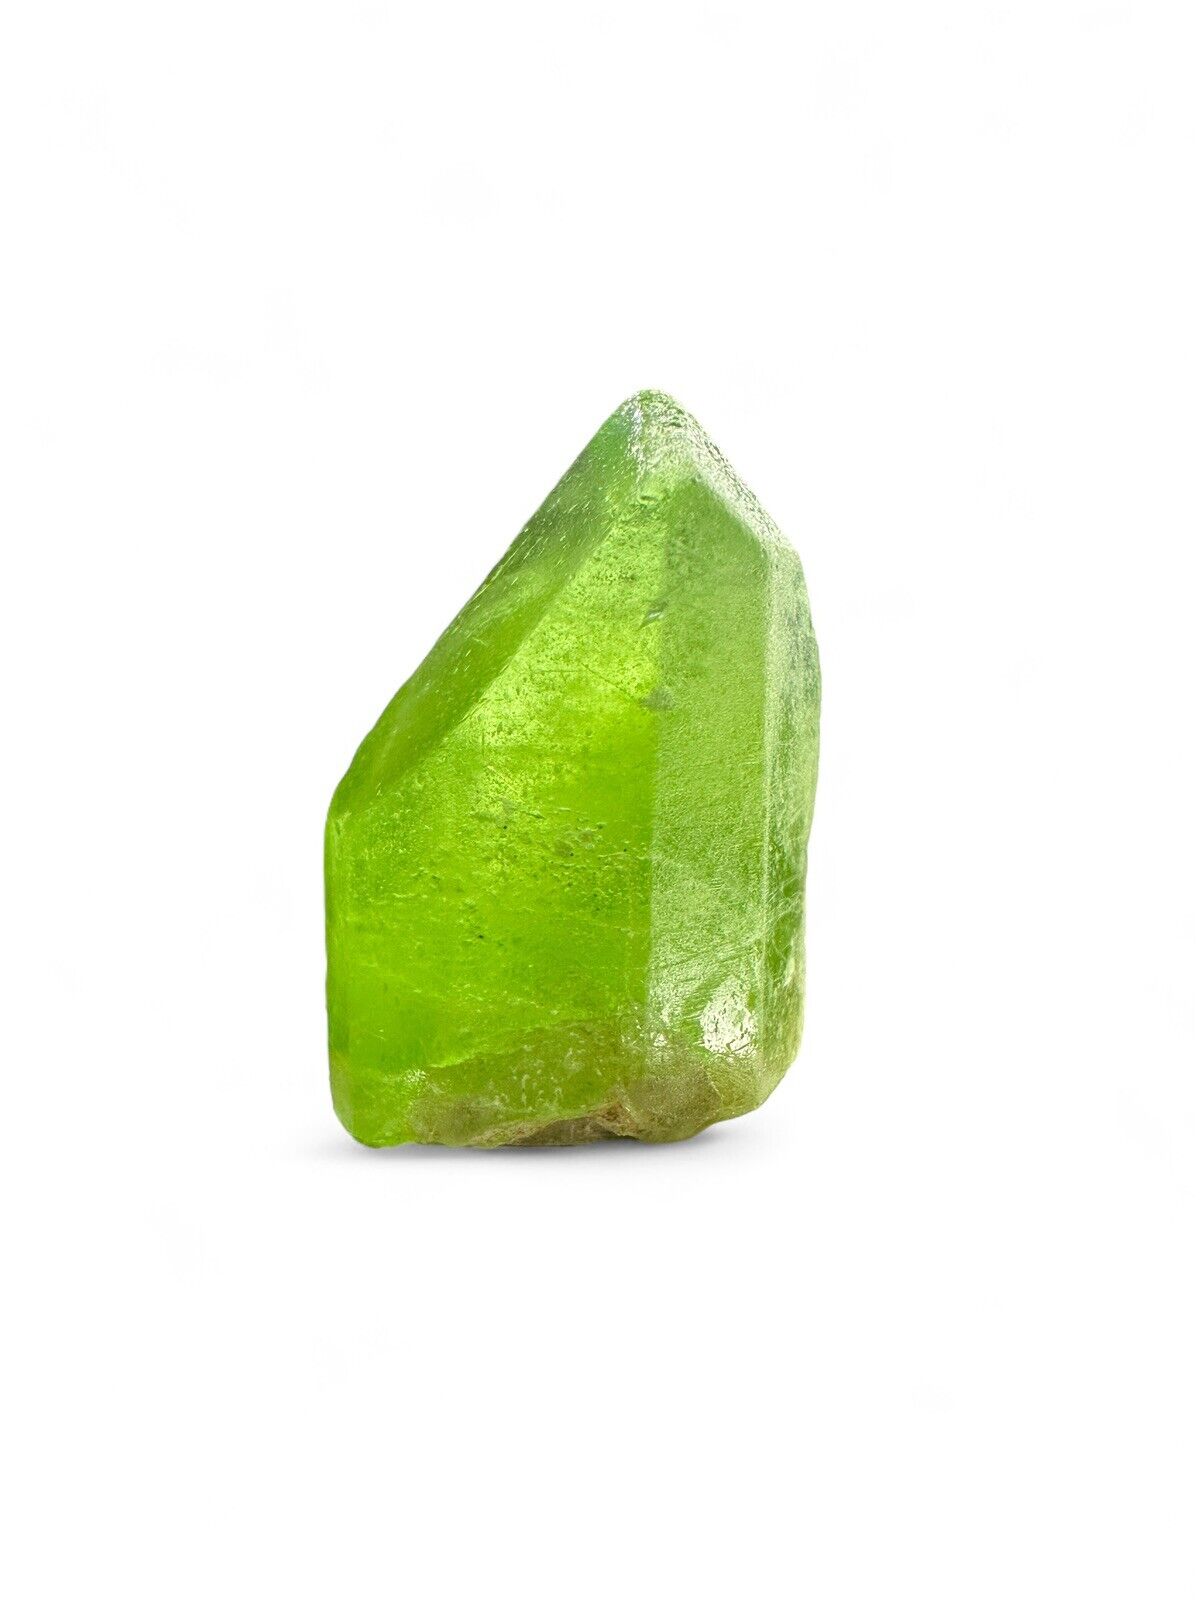 57 Carat Peridot Gemmy crystal with complete termination from Supat Gali, North